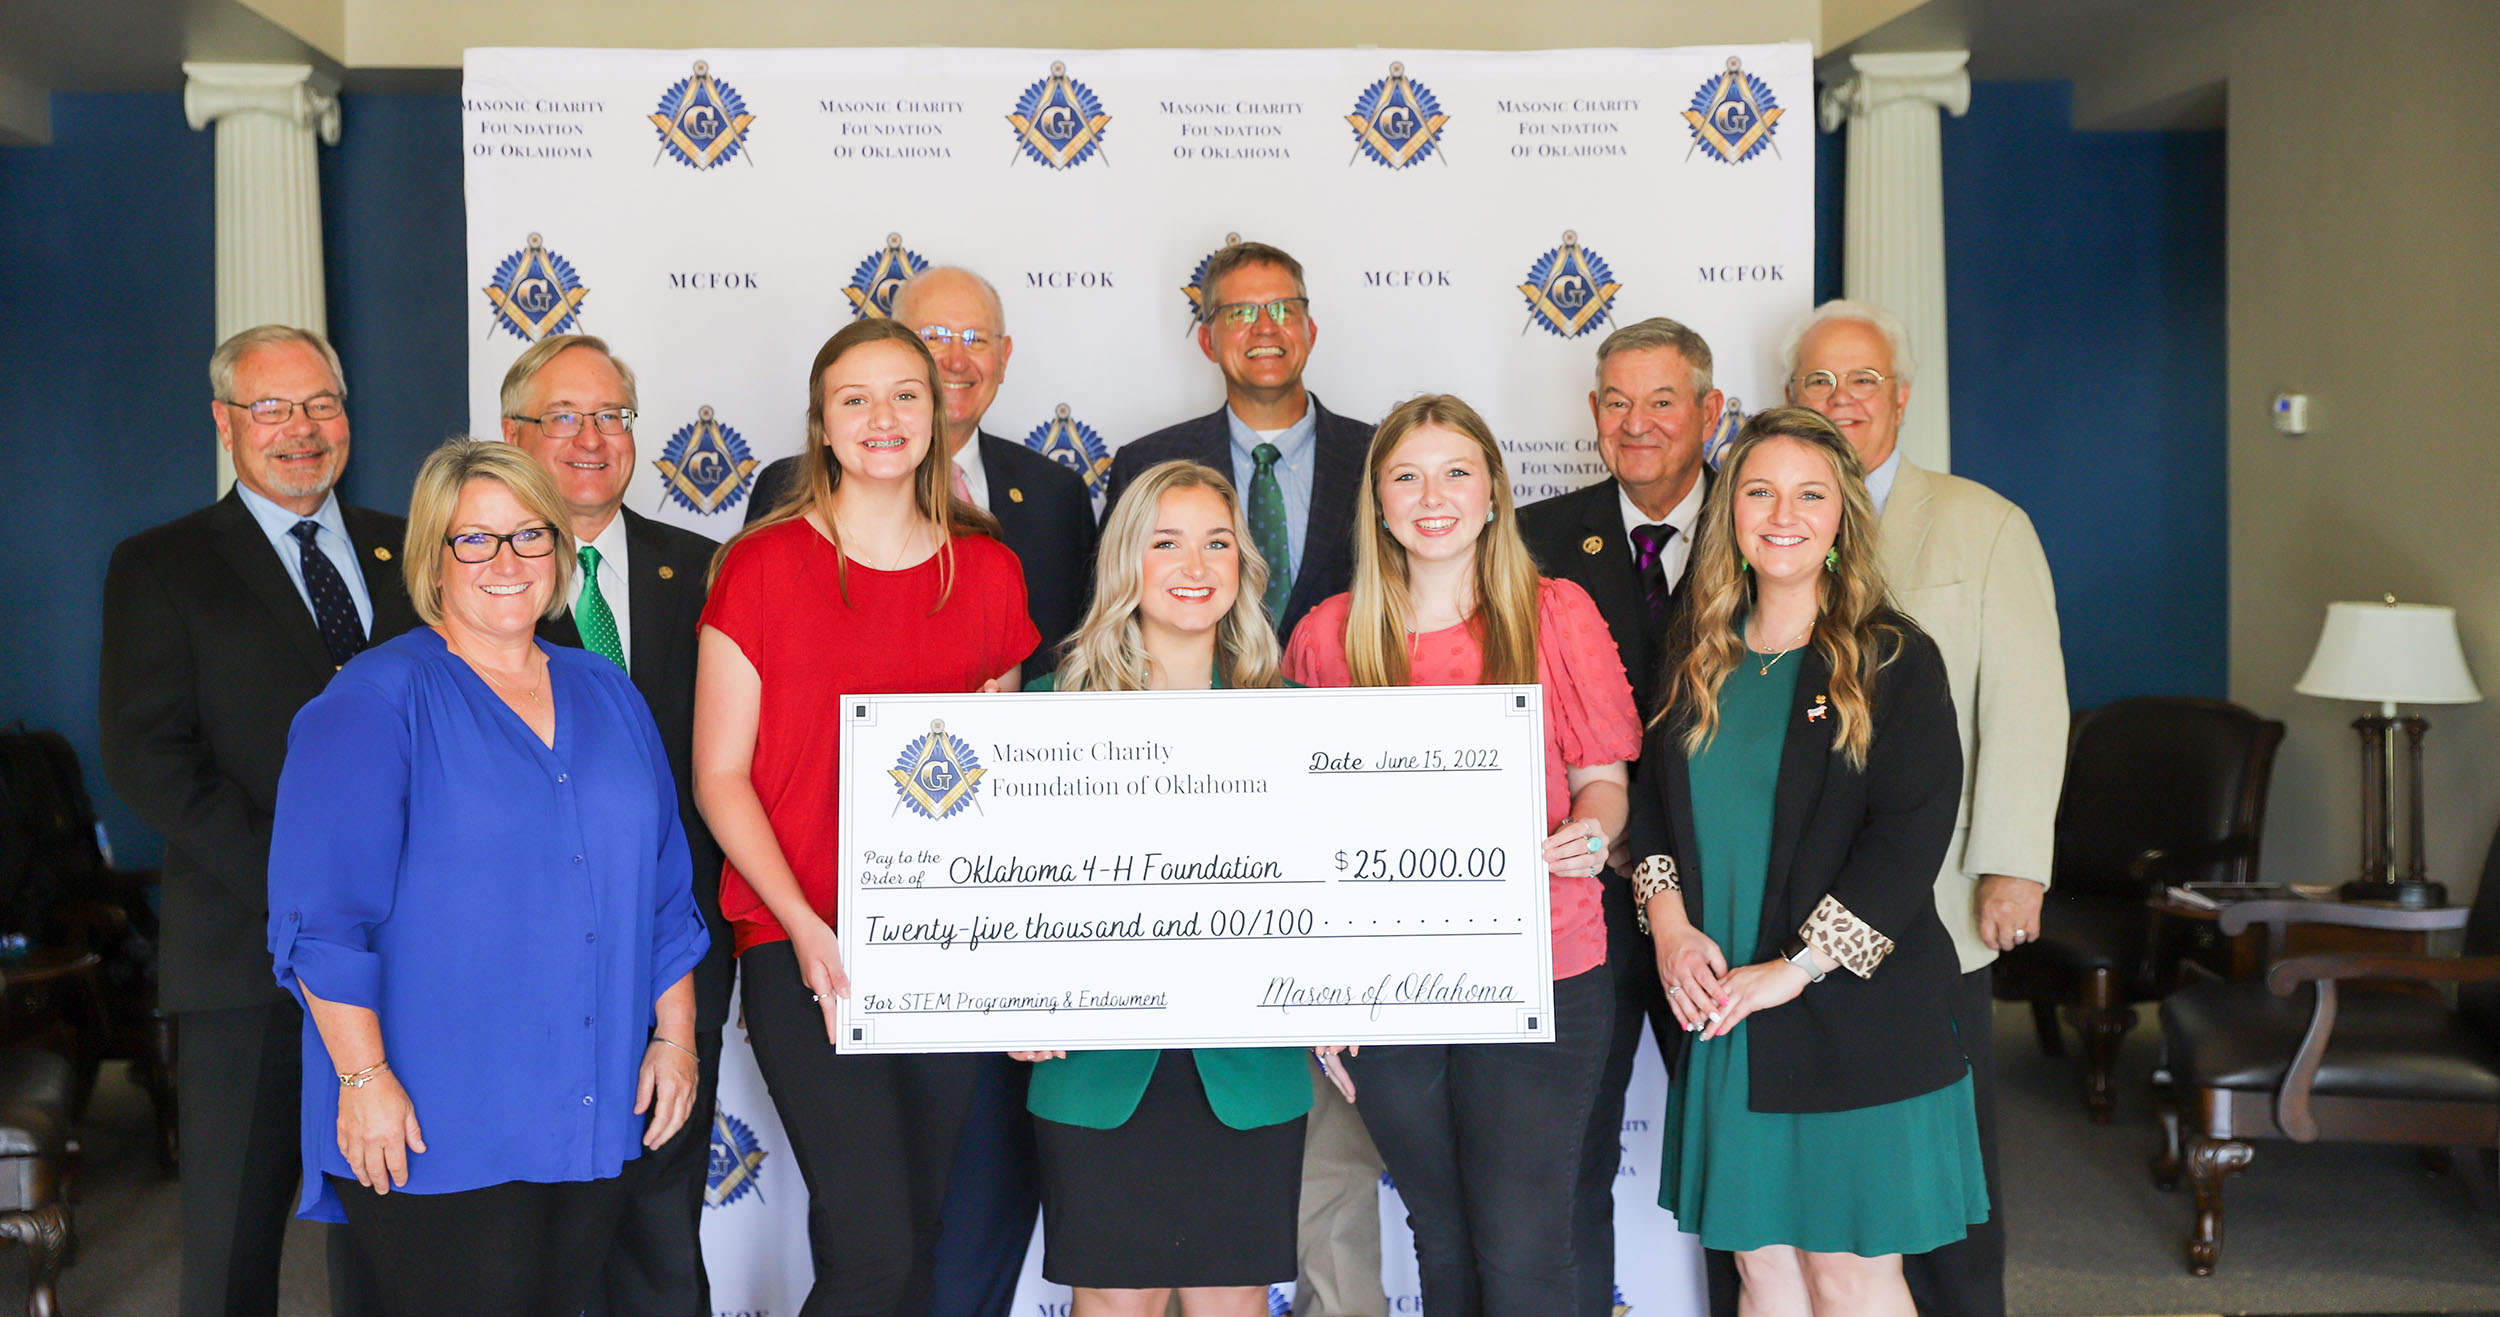 Masonic Charity Foundation sponsors 4-H Youth Leadership Summit with $25,000 donation